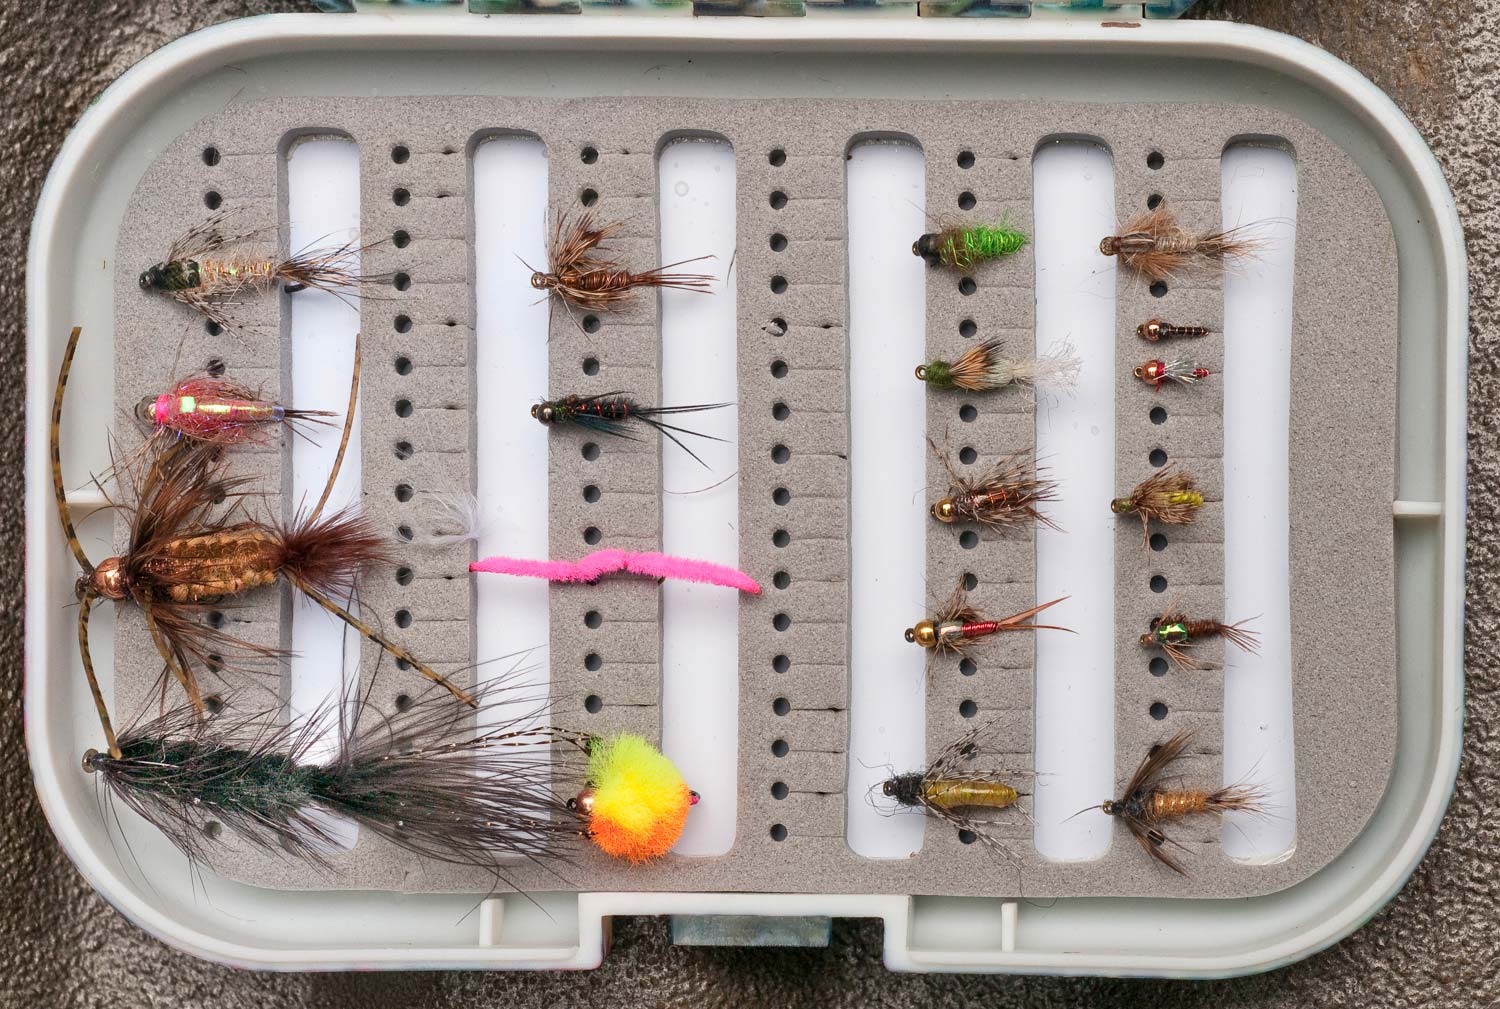 Choosing Flies for Tandem Nymph Rigs - Fly Fishing, Gink and Gasoline, How to Fly Fish, Trout Fishing, Fly Tying